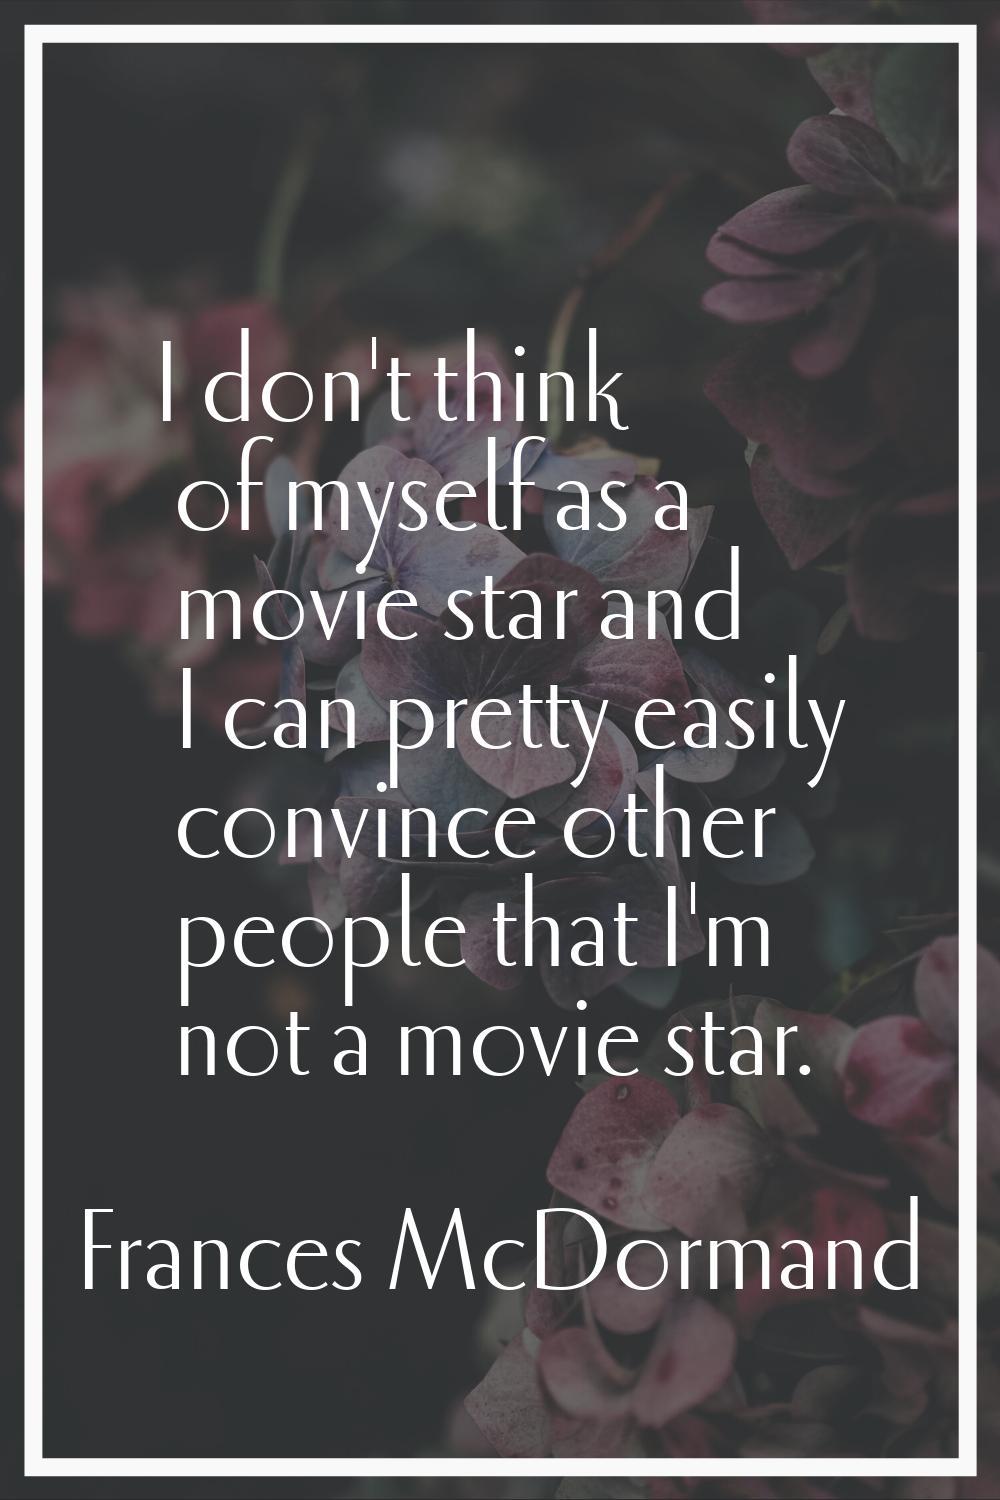 I don't think of myself as a movie star and I can pretty easily convince other people that I'm not 